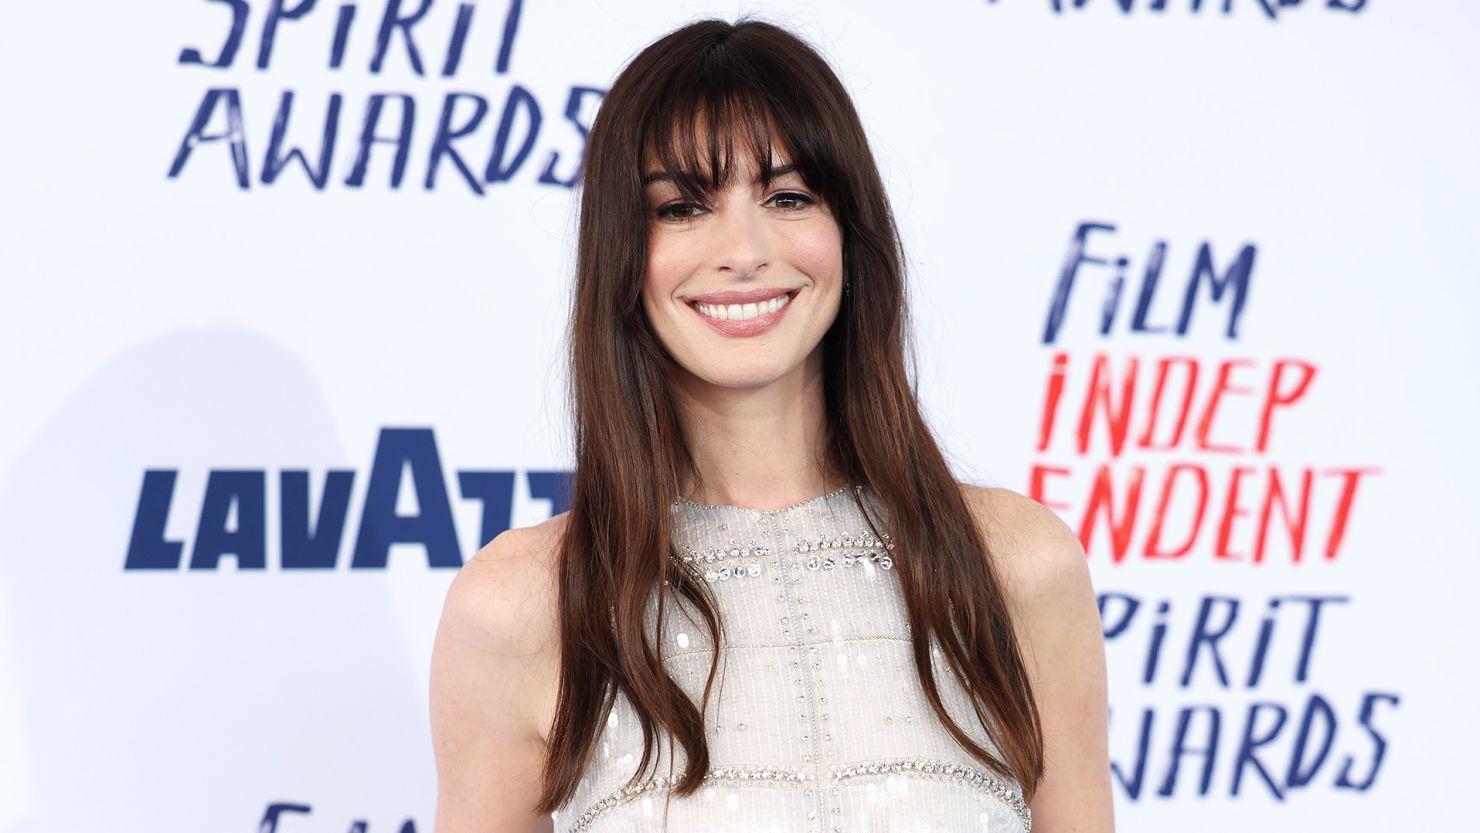 Anne Hathaway recalled being required to "make out" with numerous men to test for on-screen chemistry in the 2000s.